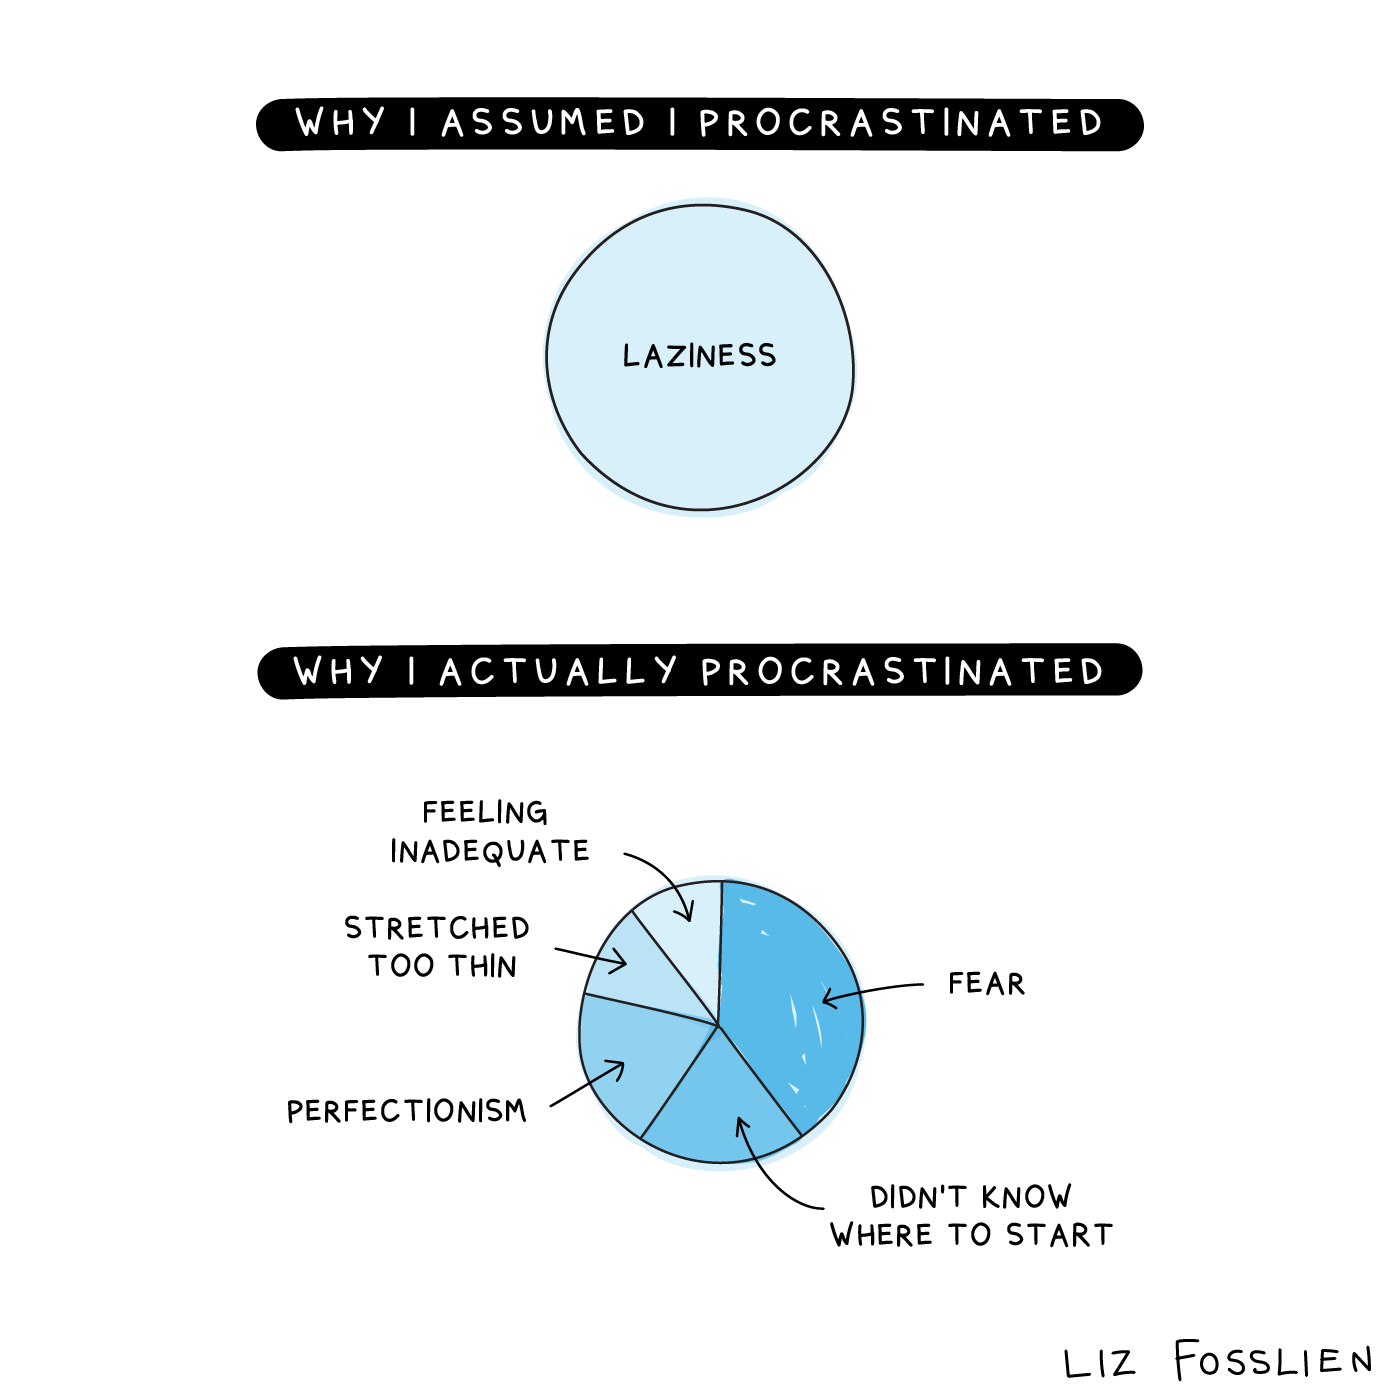 Pie chart showing the real reasons we procrastinate: feeling inadequate, fear, don't know where to start, perfectionism, stretched too thin